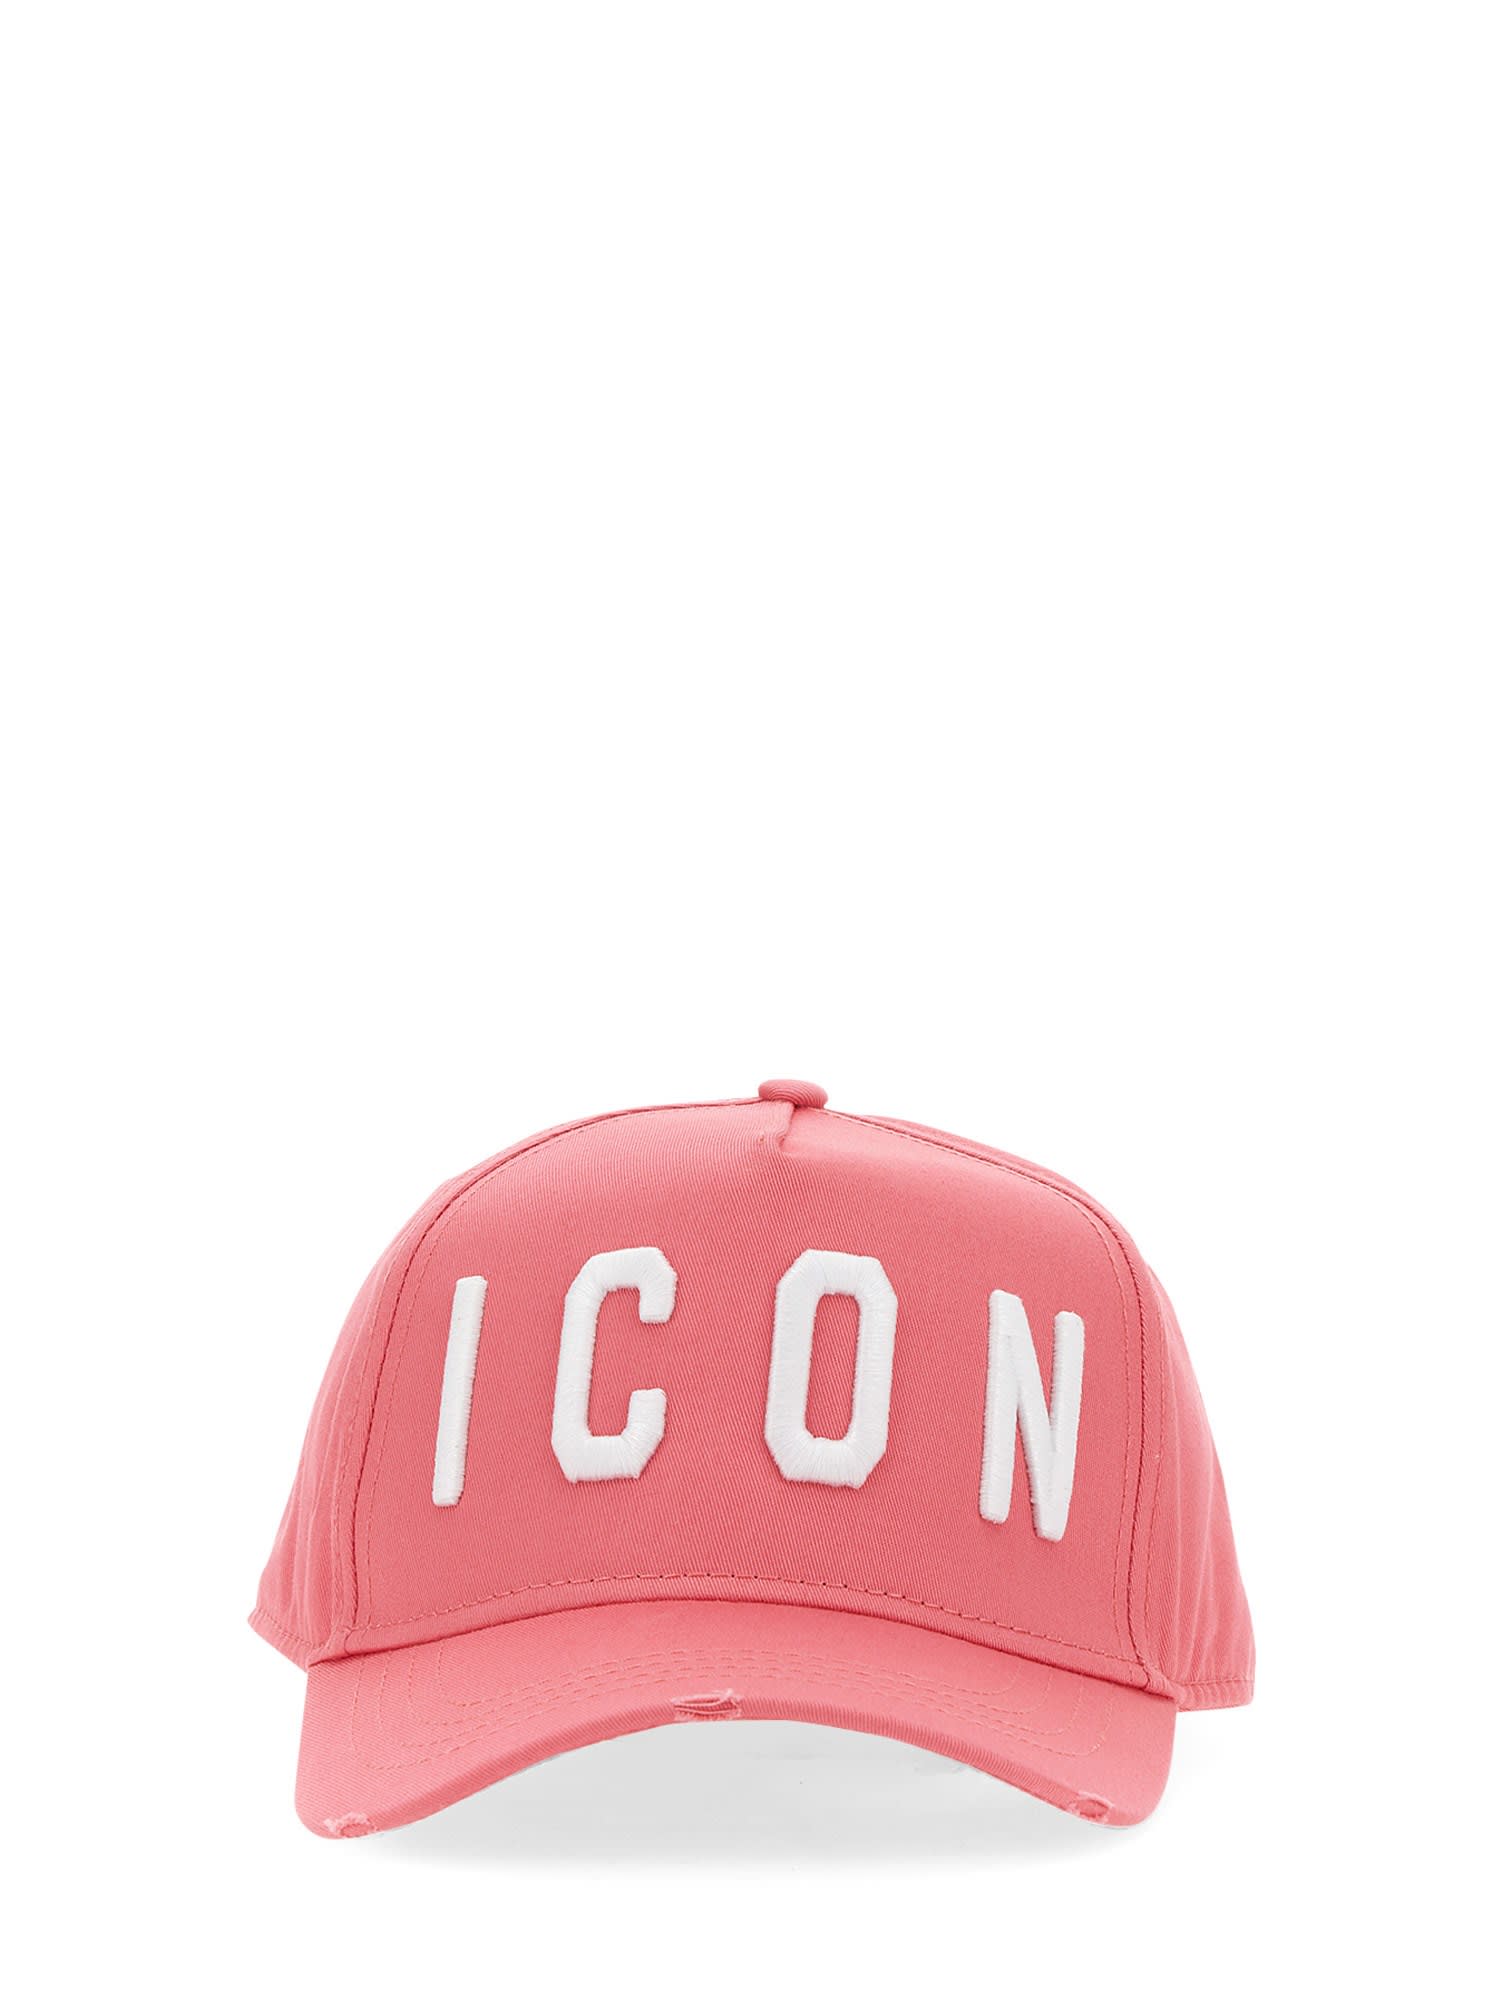 DSQUARED2 BASEBALL HAT WITH LOGO